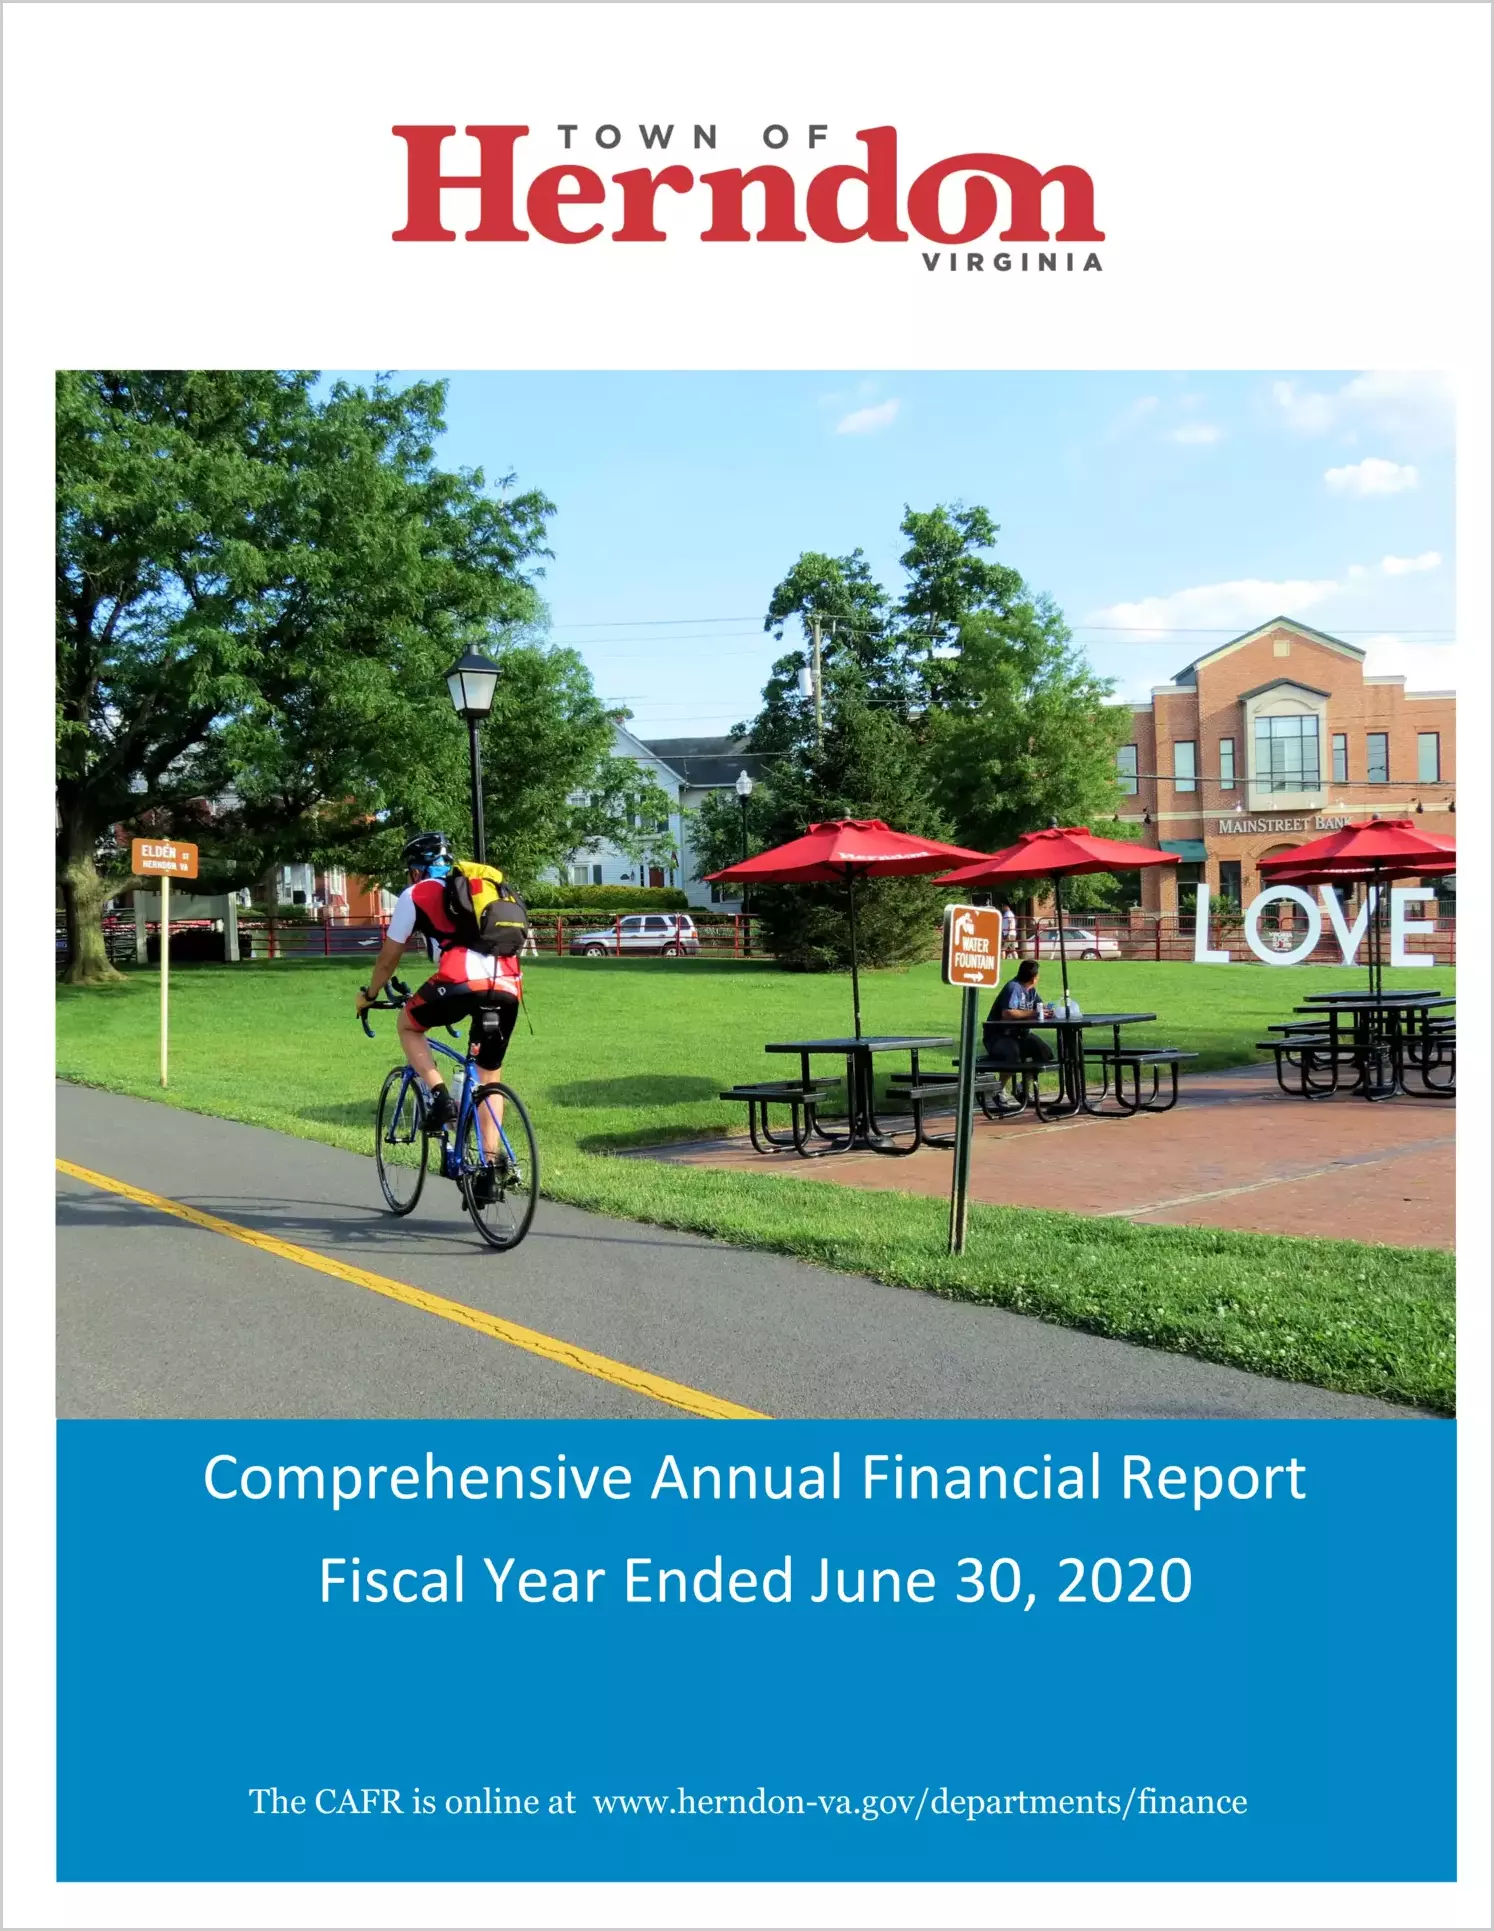 2020 Annual Financial Report for Town of Herndon